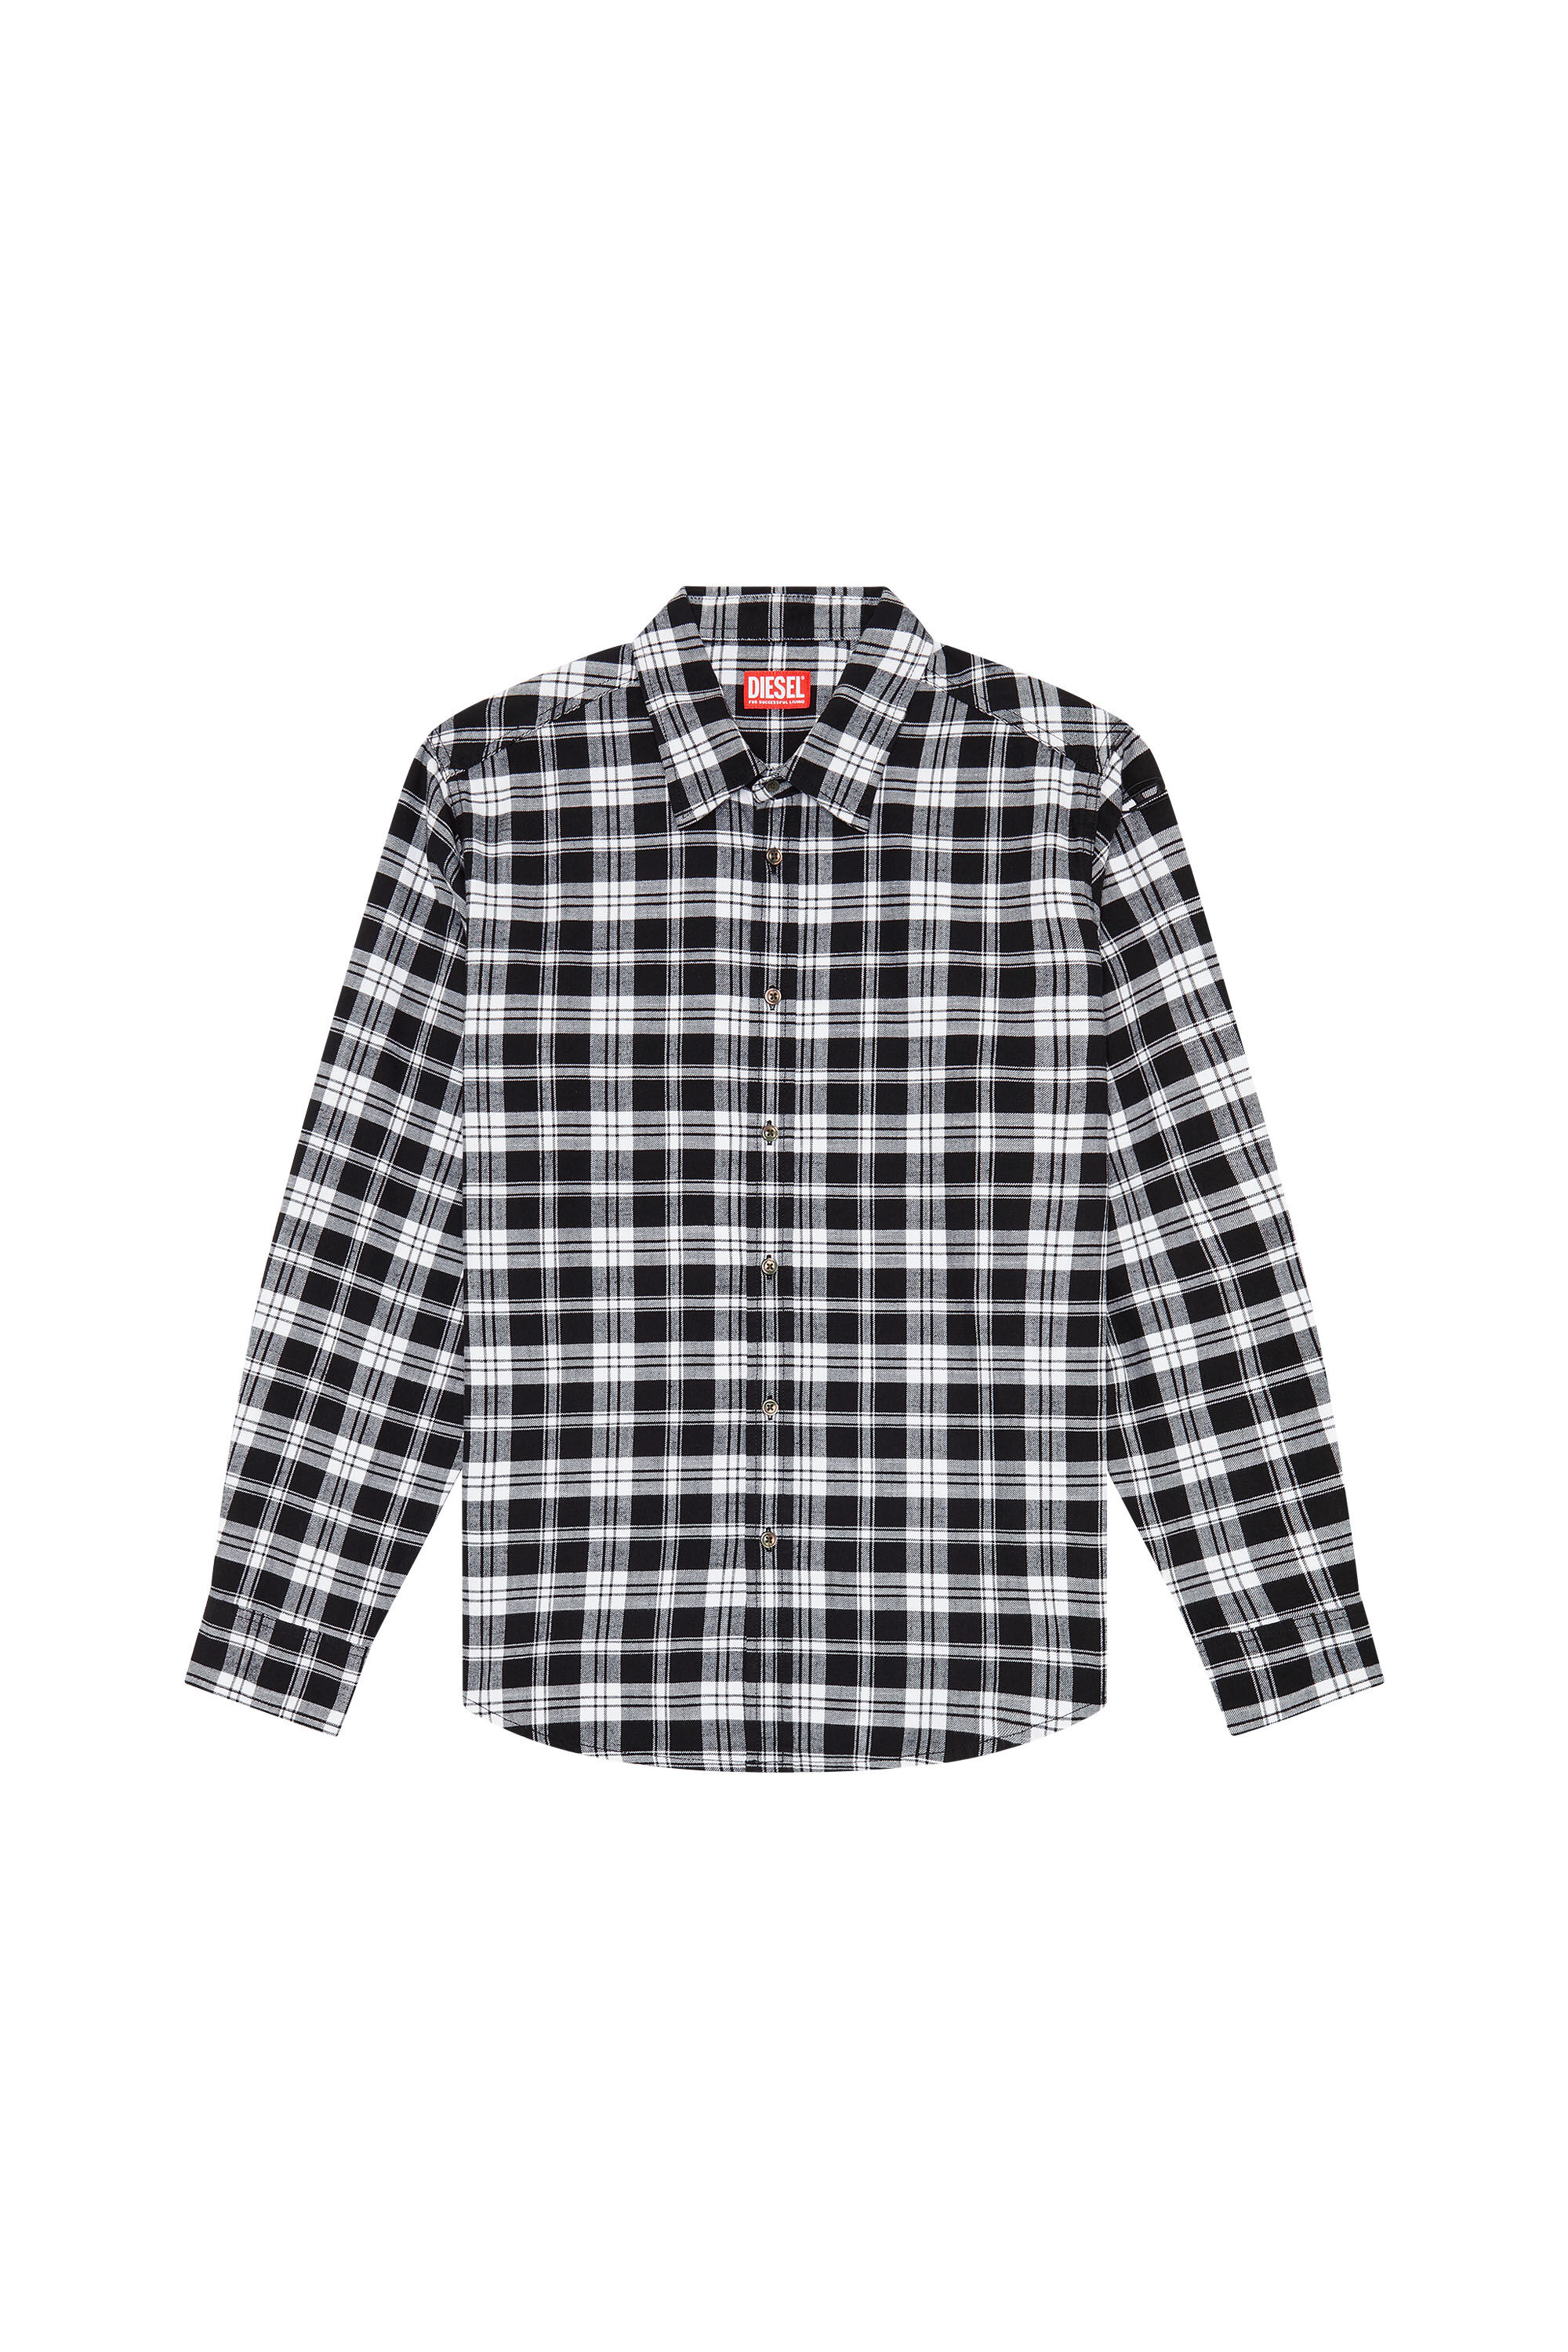 Diesel - S-UMBE-CHECK-NW, Man Shirt in checked flannel in Multicolor - Image 2